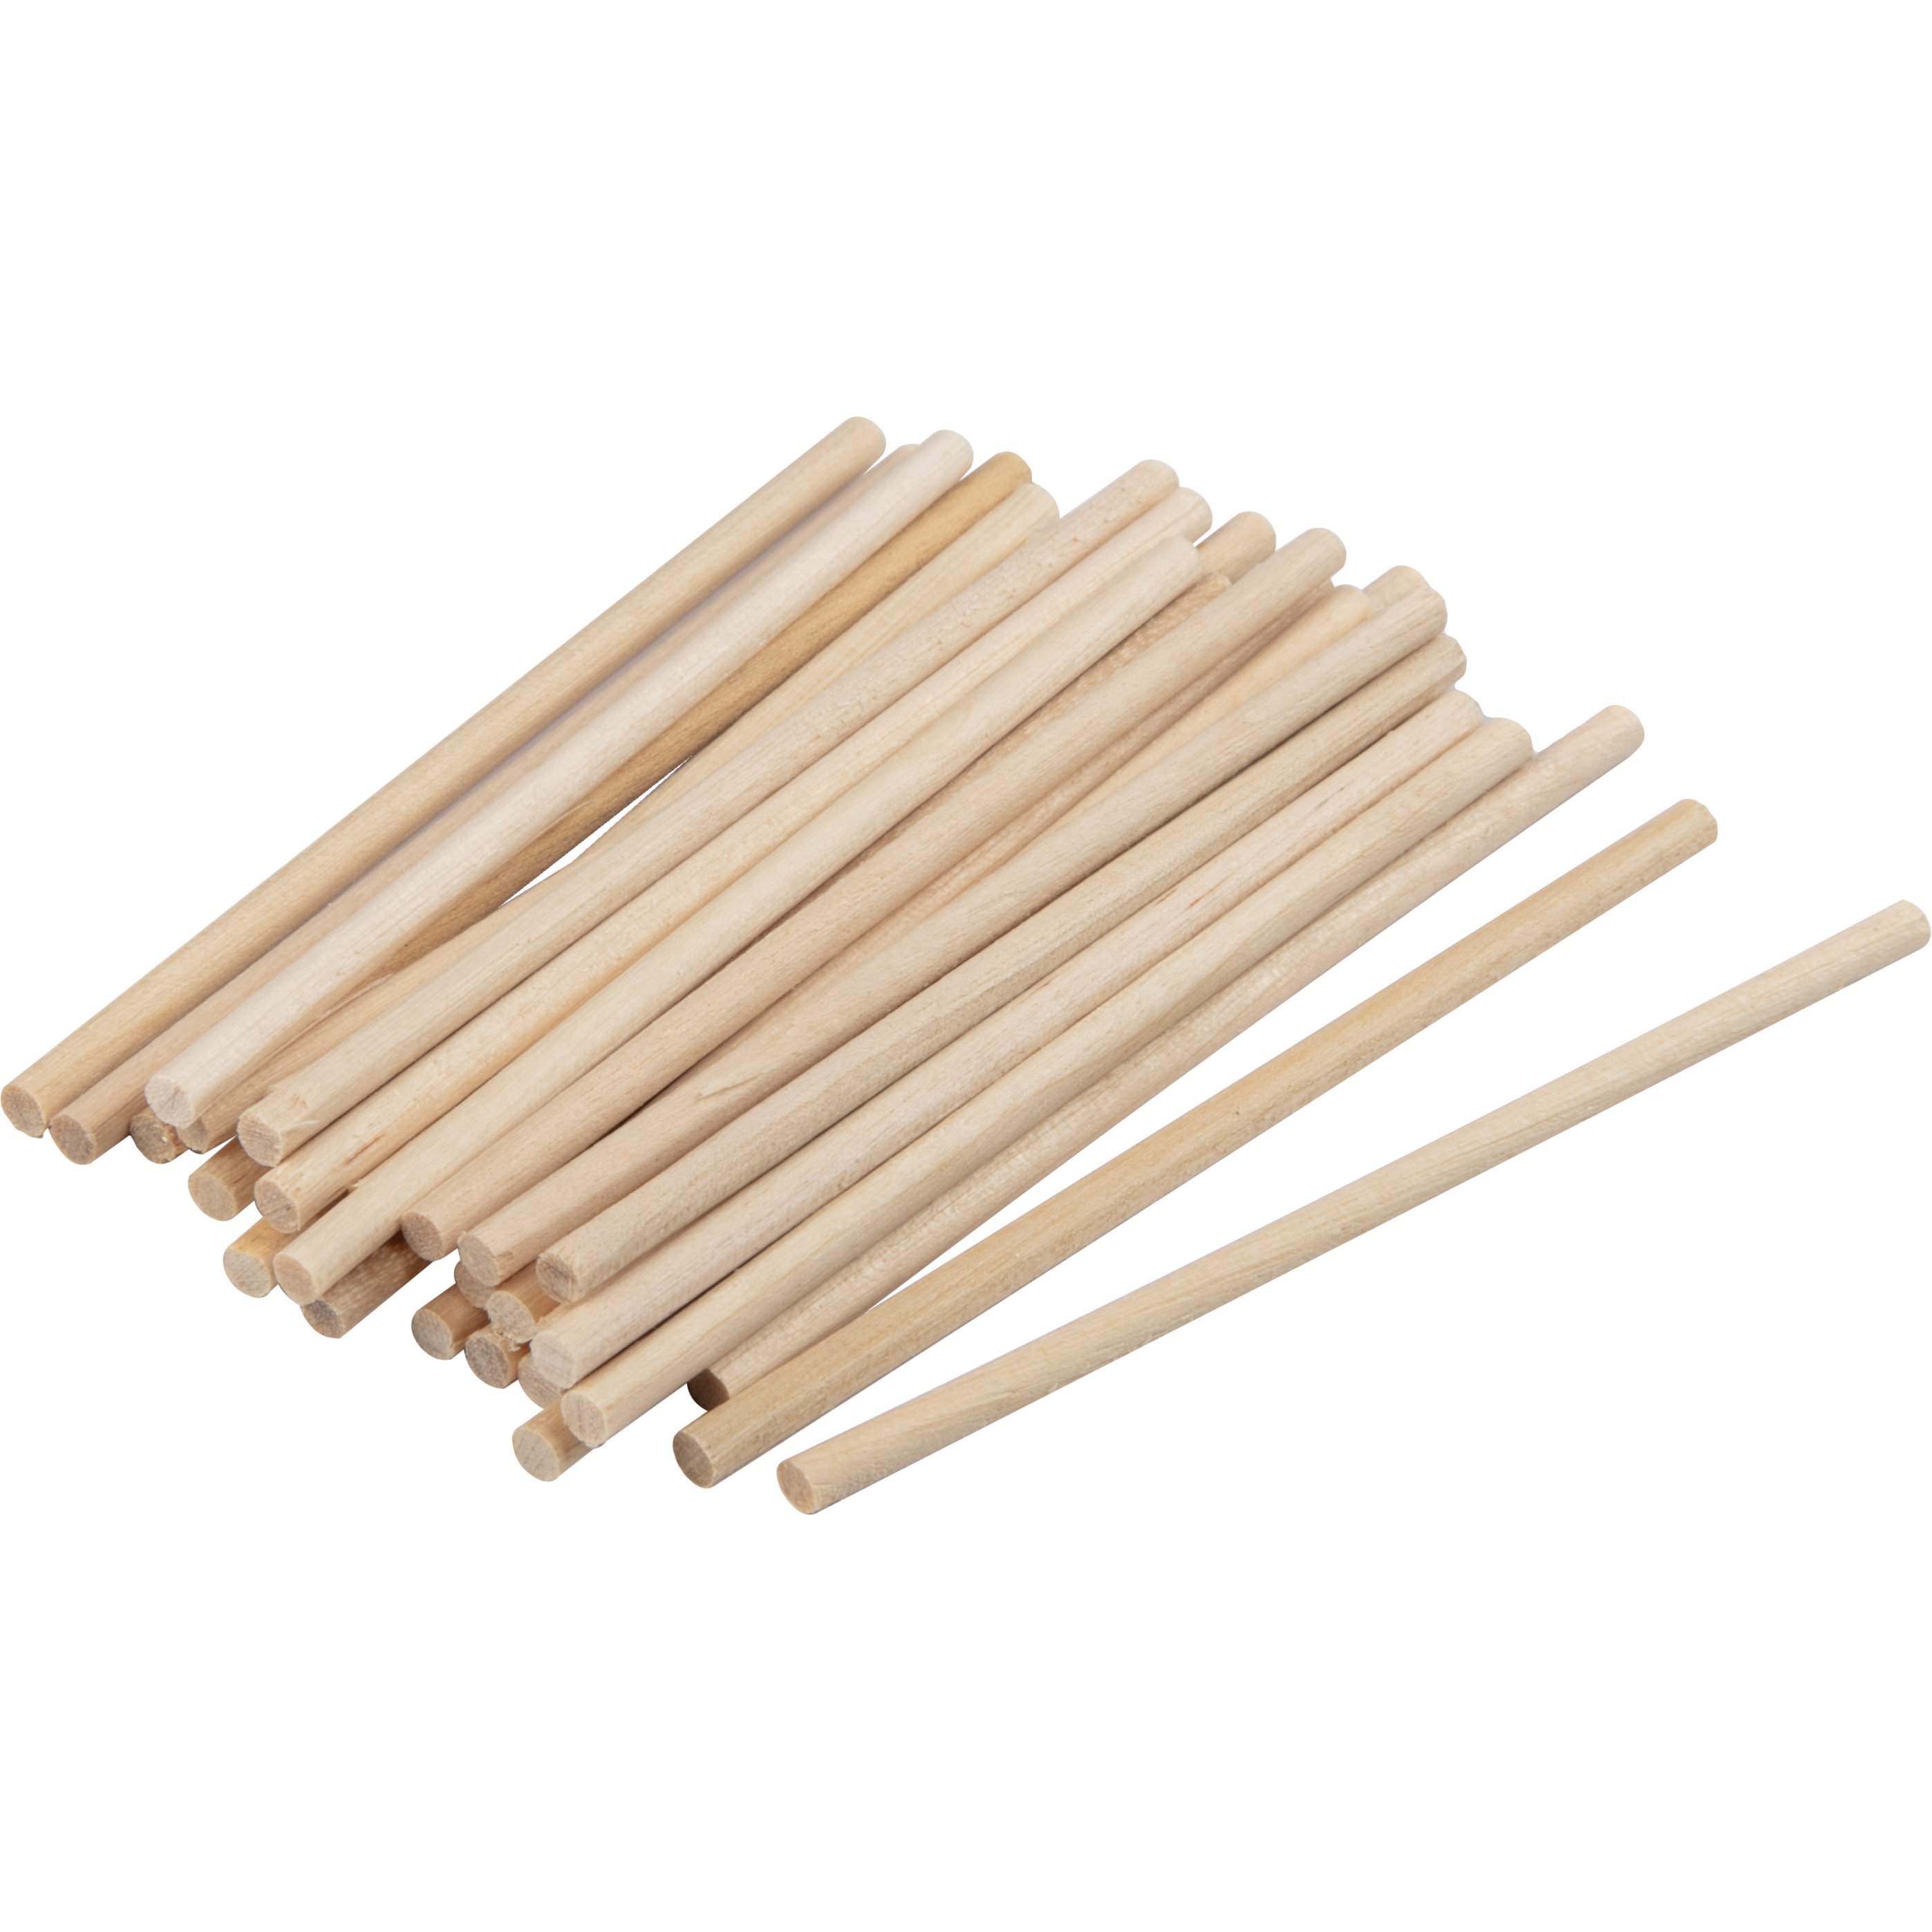 Art Star Round Wooden Dowel Sticks 8 x 0.3cm 200 Pieces 719 Get the Look at  lower prices